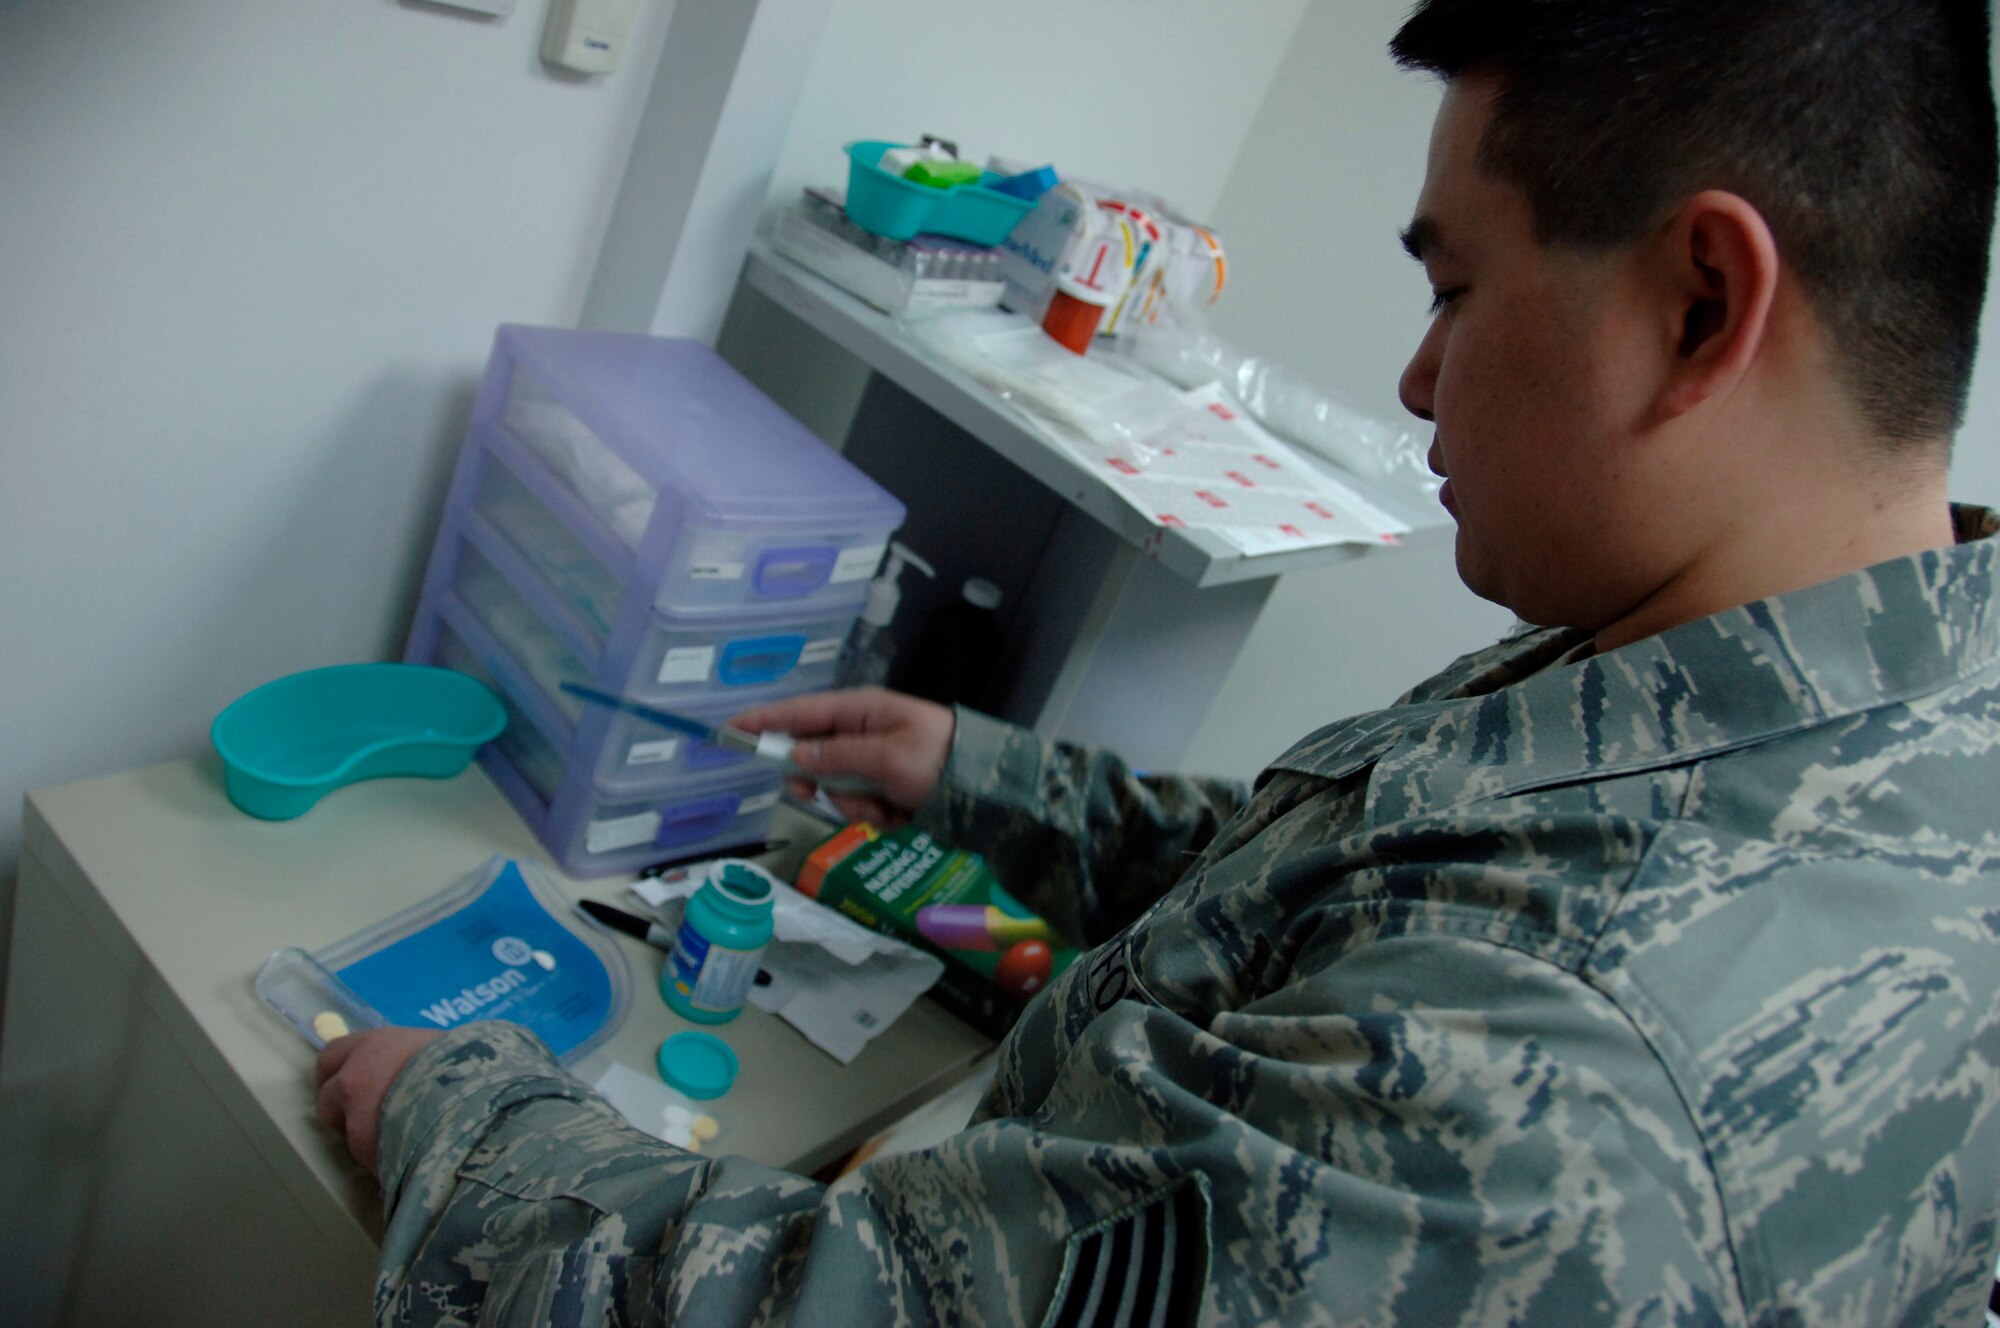 SOUTHWEST ASIA -- Staff Sgt. Edwardson Aquino, an independent duty medical technician assigned to the 380th Expeditionary Medical Group here, counts pills as he prepares a prescription for a patient. The 380th EMDG houses a general practice, flight medicine, public health, bioenvironmental engineering and life skills clinic. (U.S. Air Force photo by Staff Sgt. Mike Andriacco) (Released)